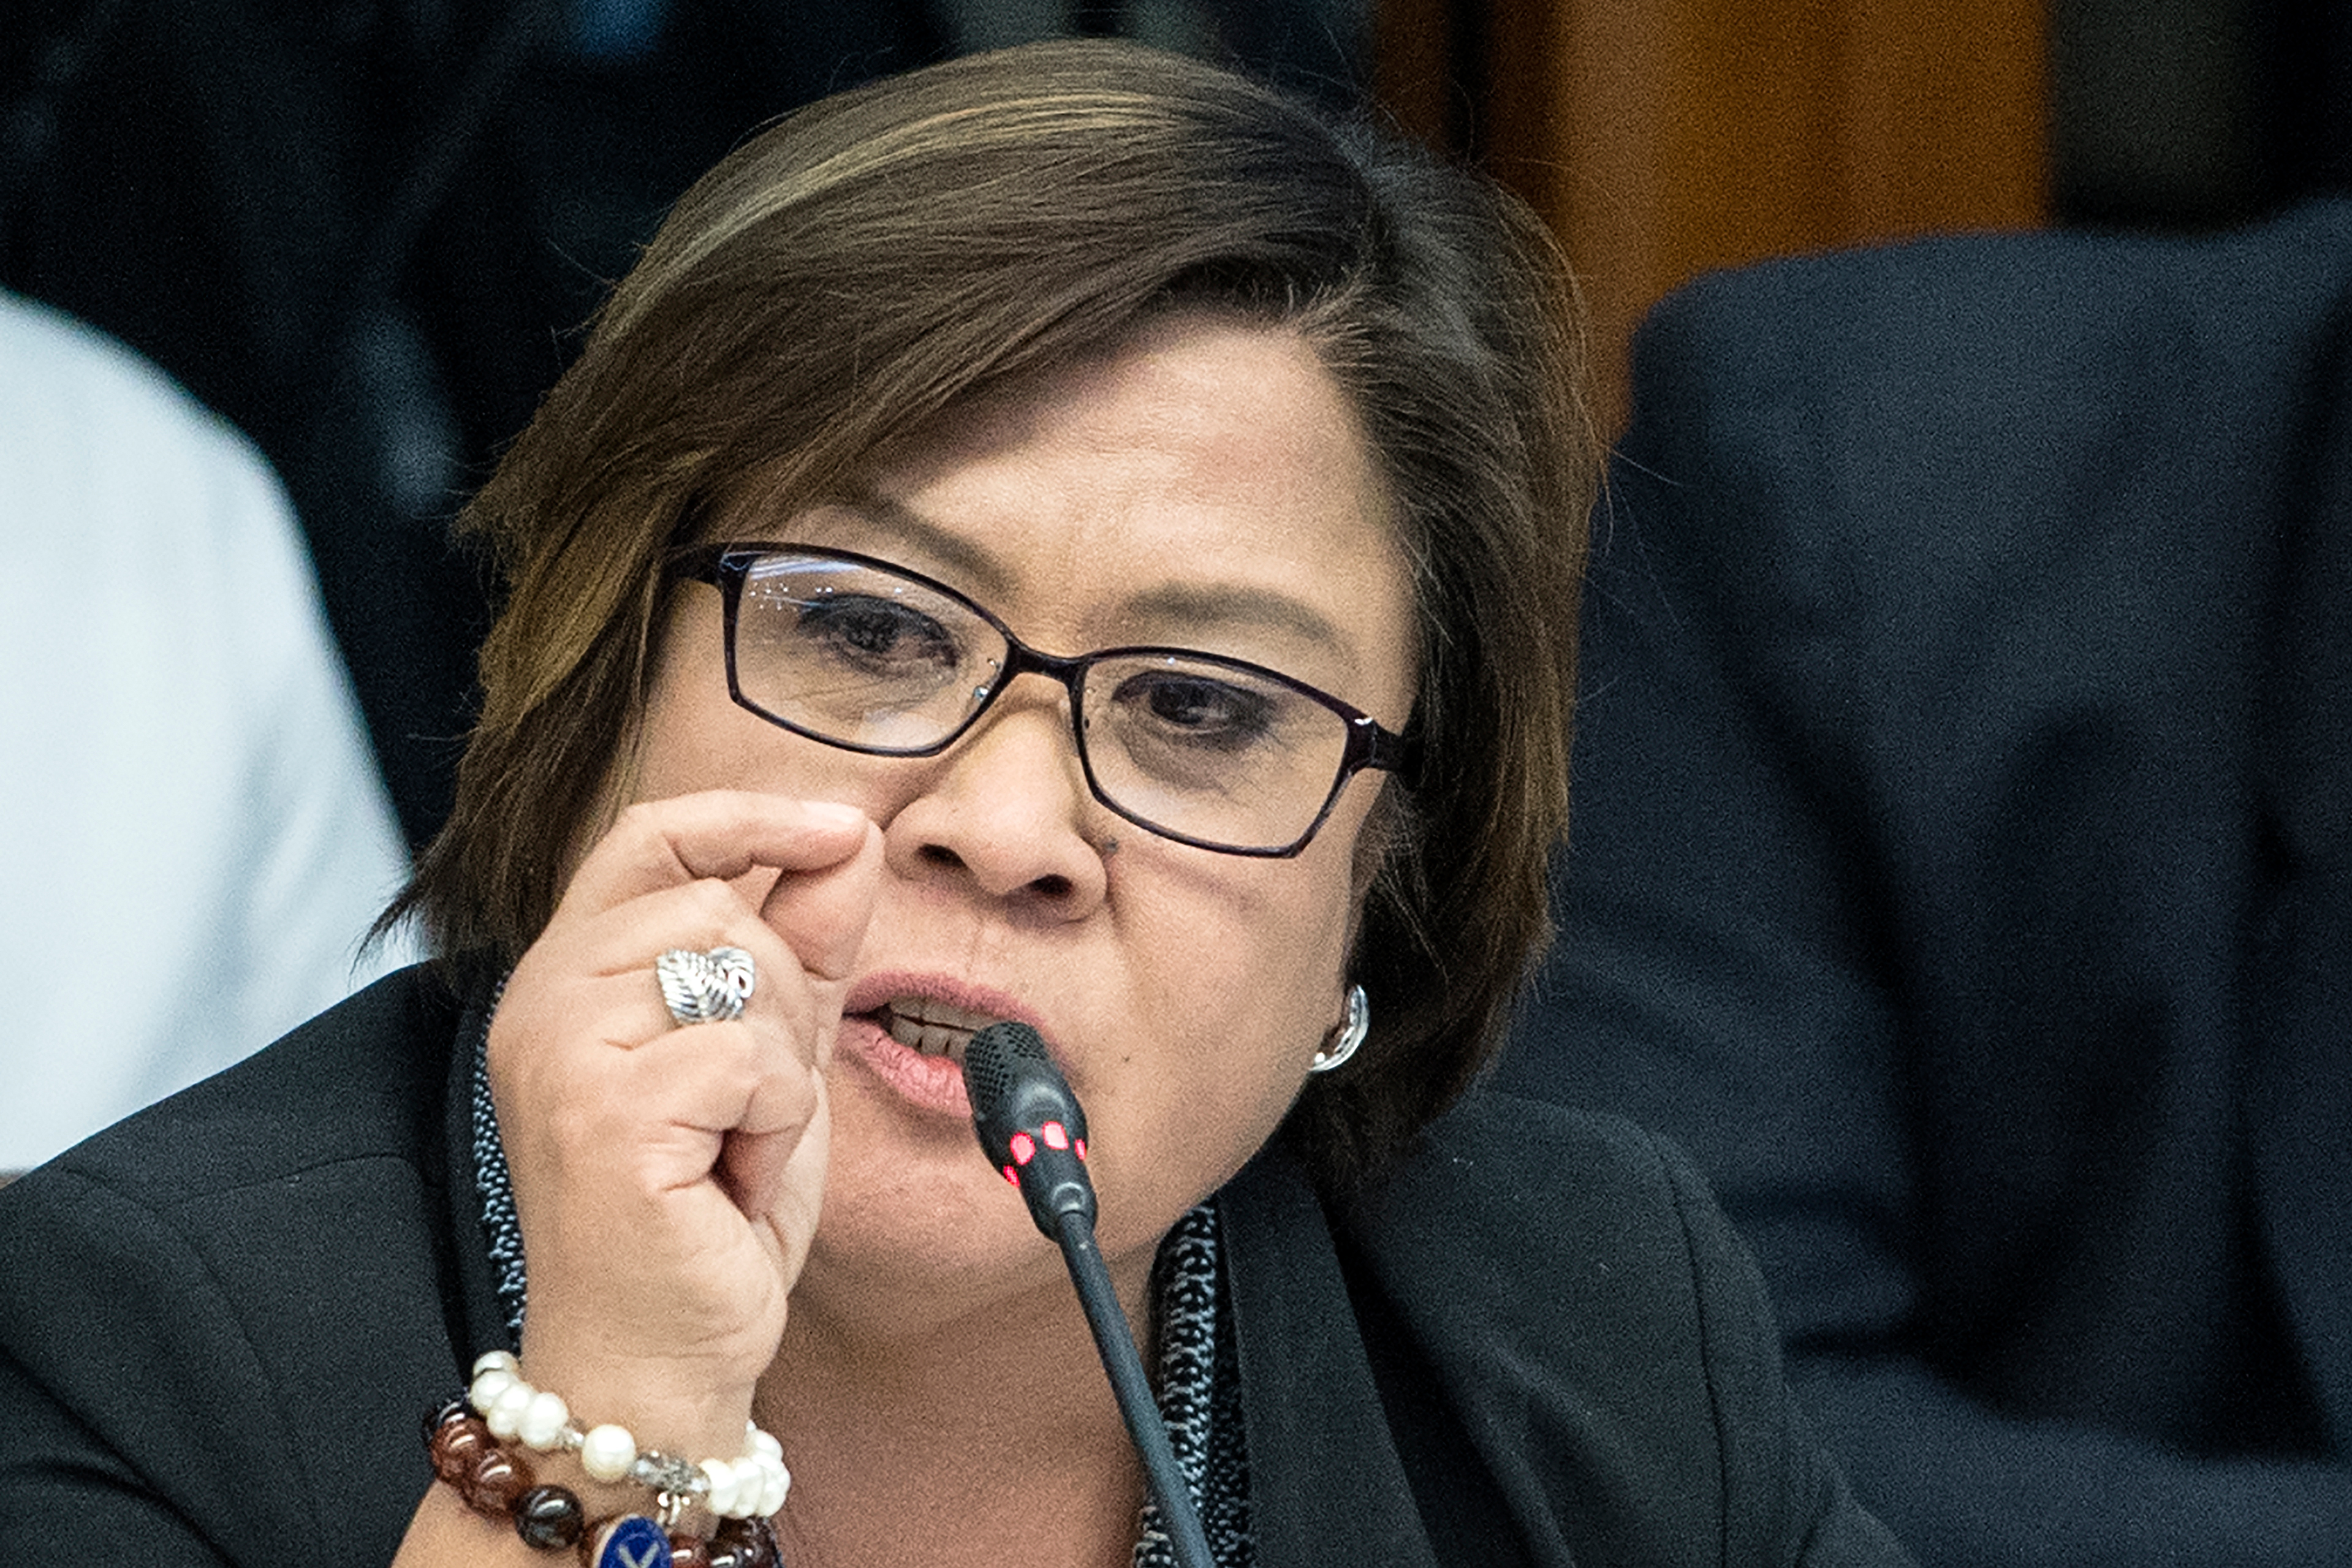 Philippine Senator Leila De Lima gestures during a senate hearing into the death of Albuera Mayor Rolando Espinosa in Manila on November 10, 2016. Espinosa, who President Rodrigo Duterte named as being involved in the illegal drug trade, was shot dead in jail on November 5, police said, the second local official implicated in narcotics to be killed in two weeks. / AFP PHOTO / NOEL CELIS